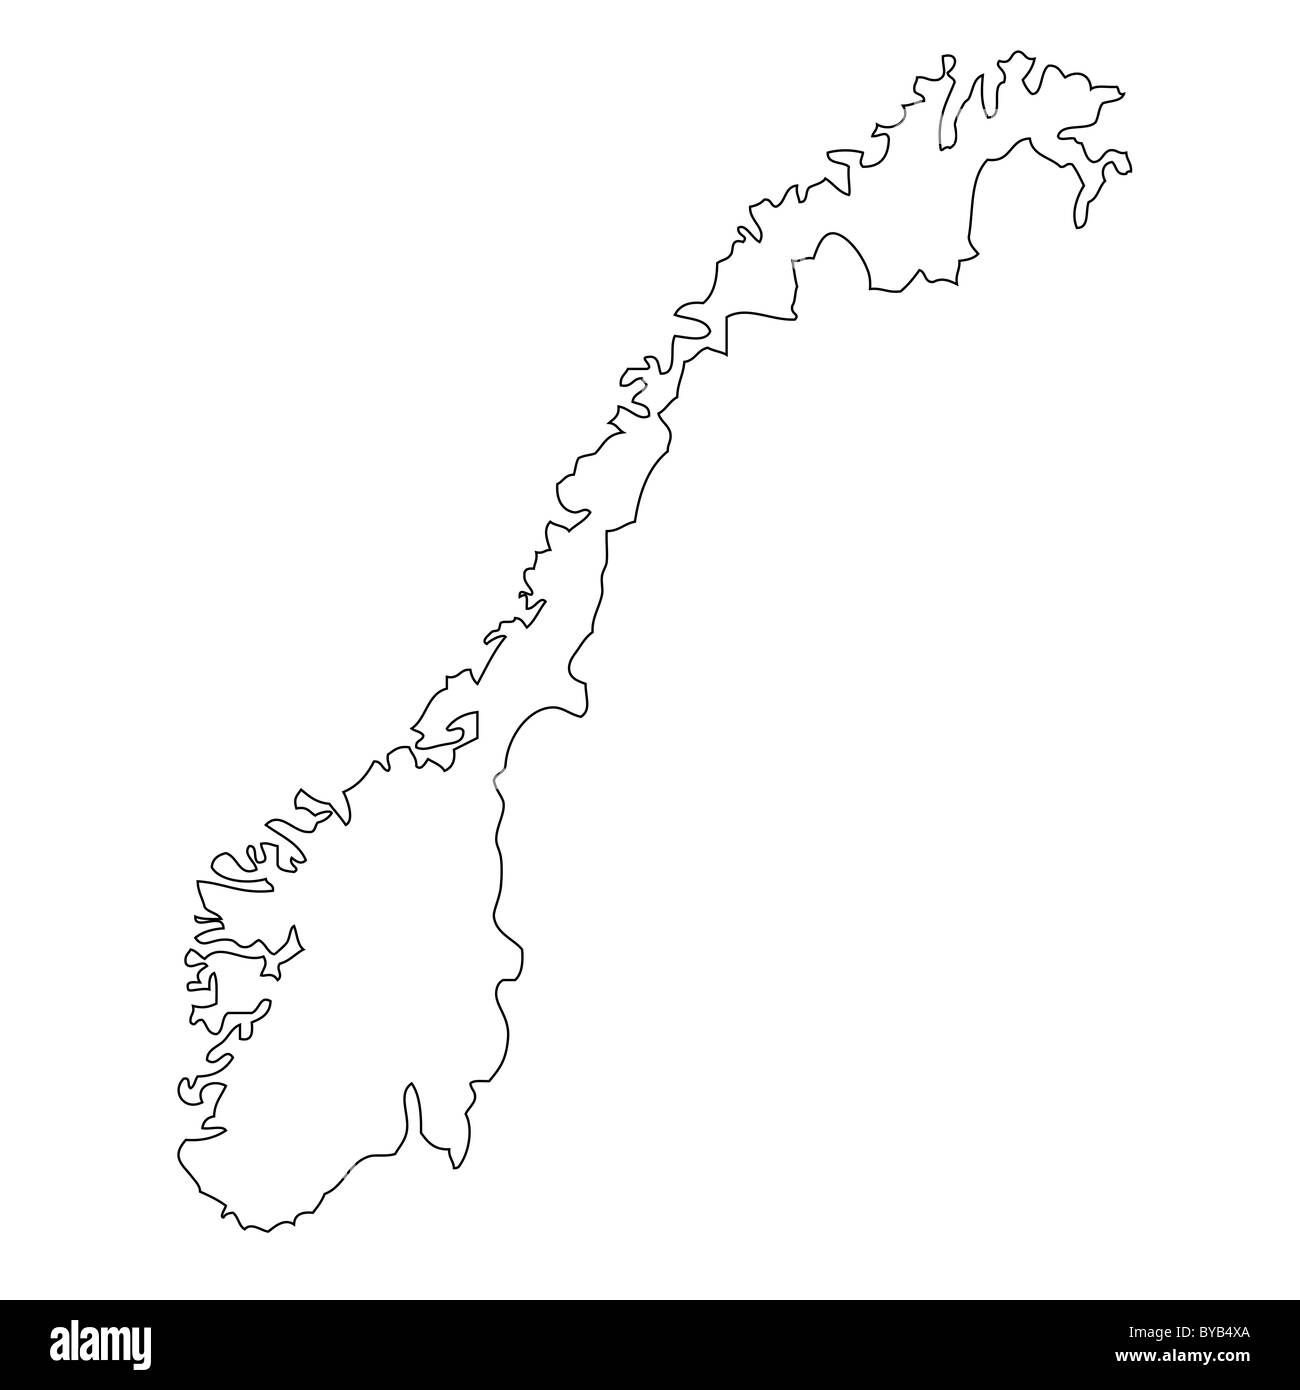 Outline, map of Norway Stock Photo